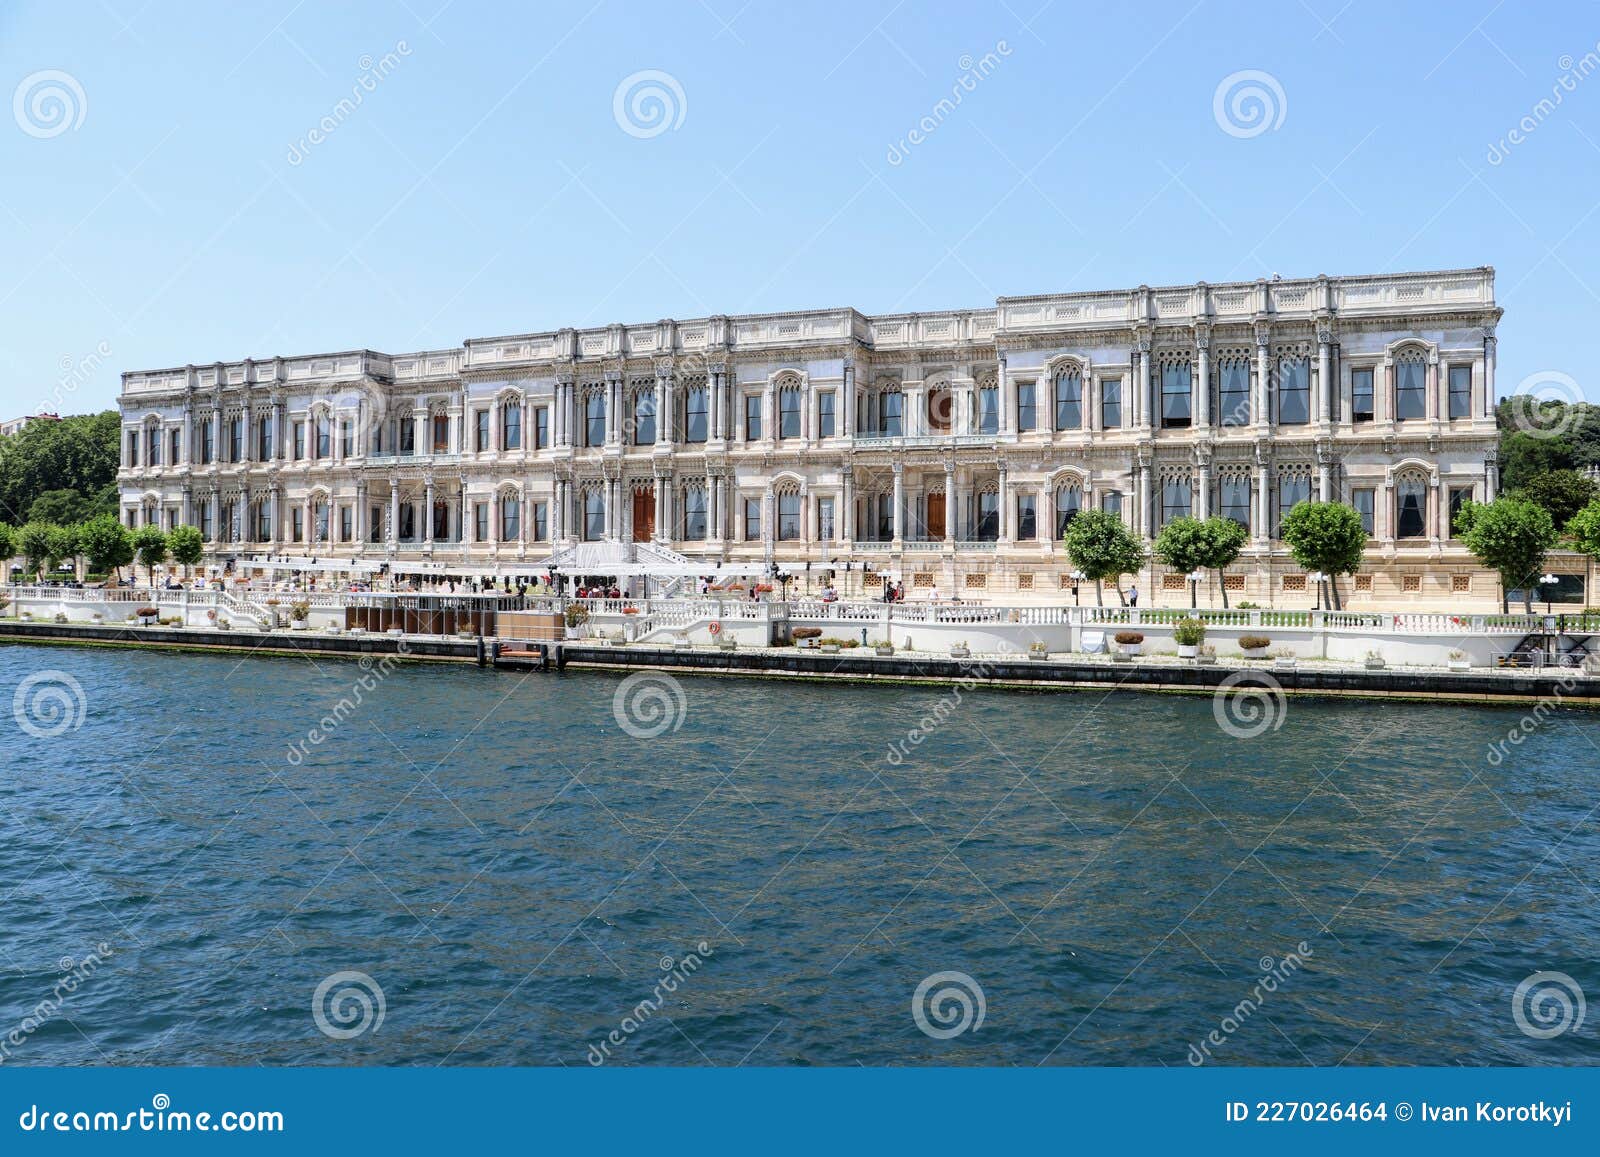 instanbul palace view from the bosphorus